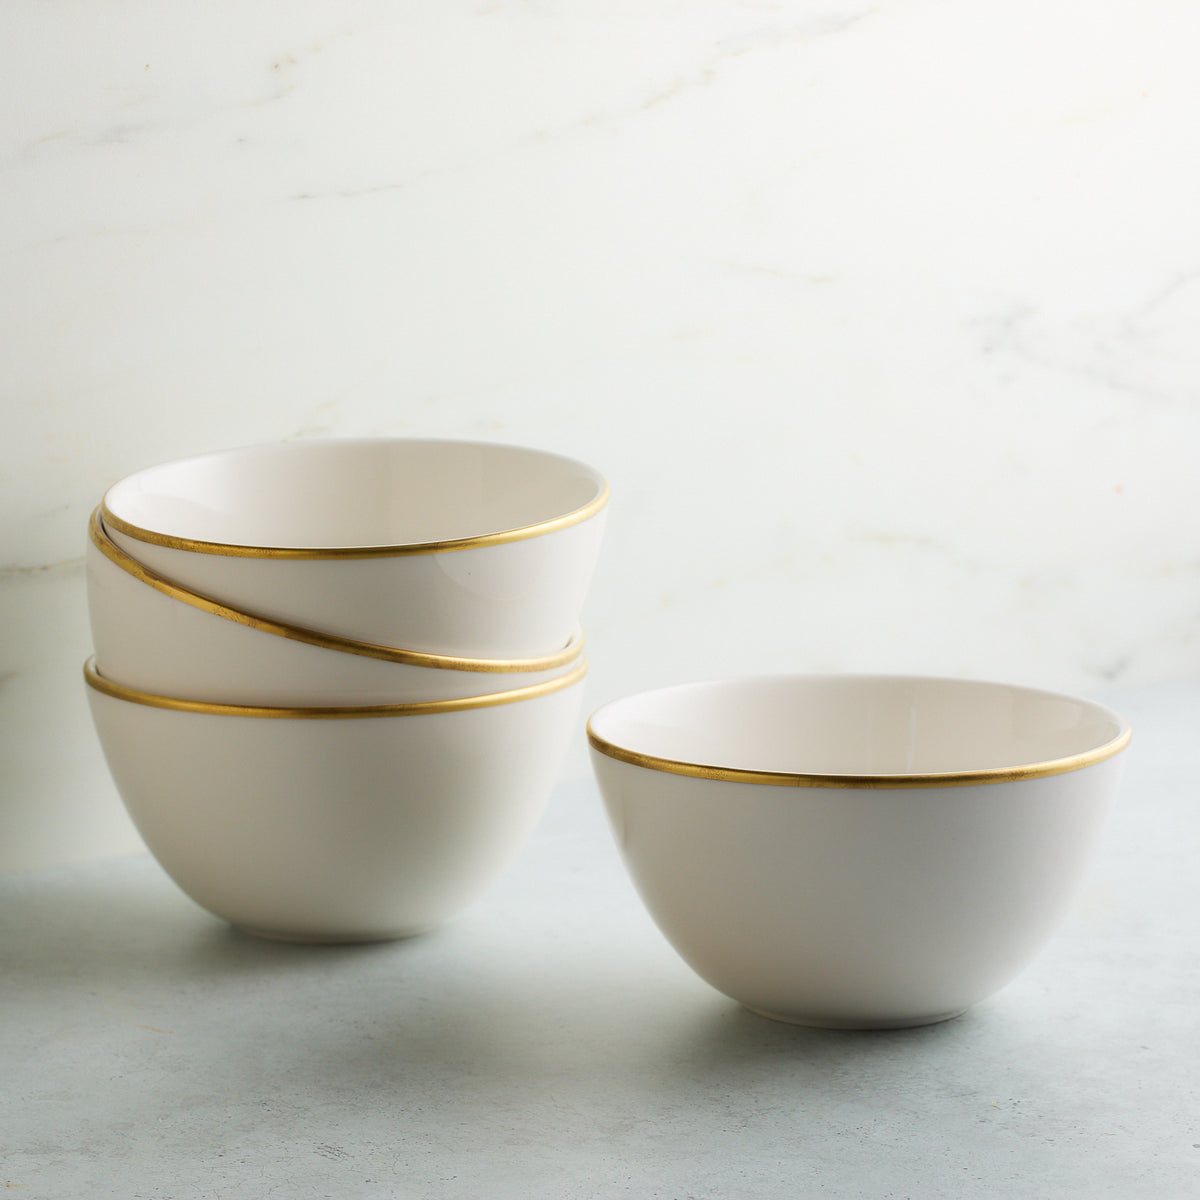 Four Caskata Artisanal Home Grace Gold Cereal Bowls, three stacked and one separate, placed on a light-colored surface with a marble background.